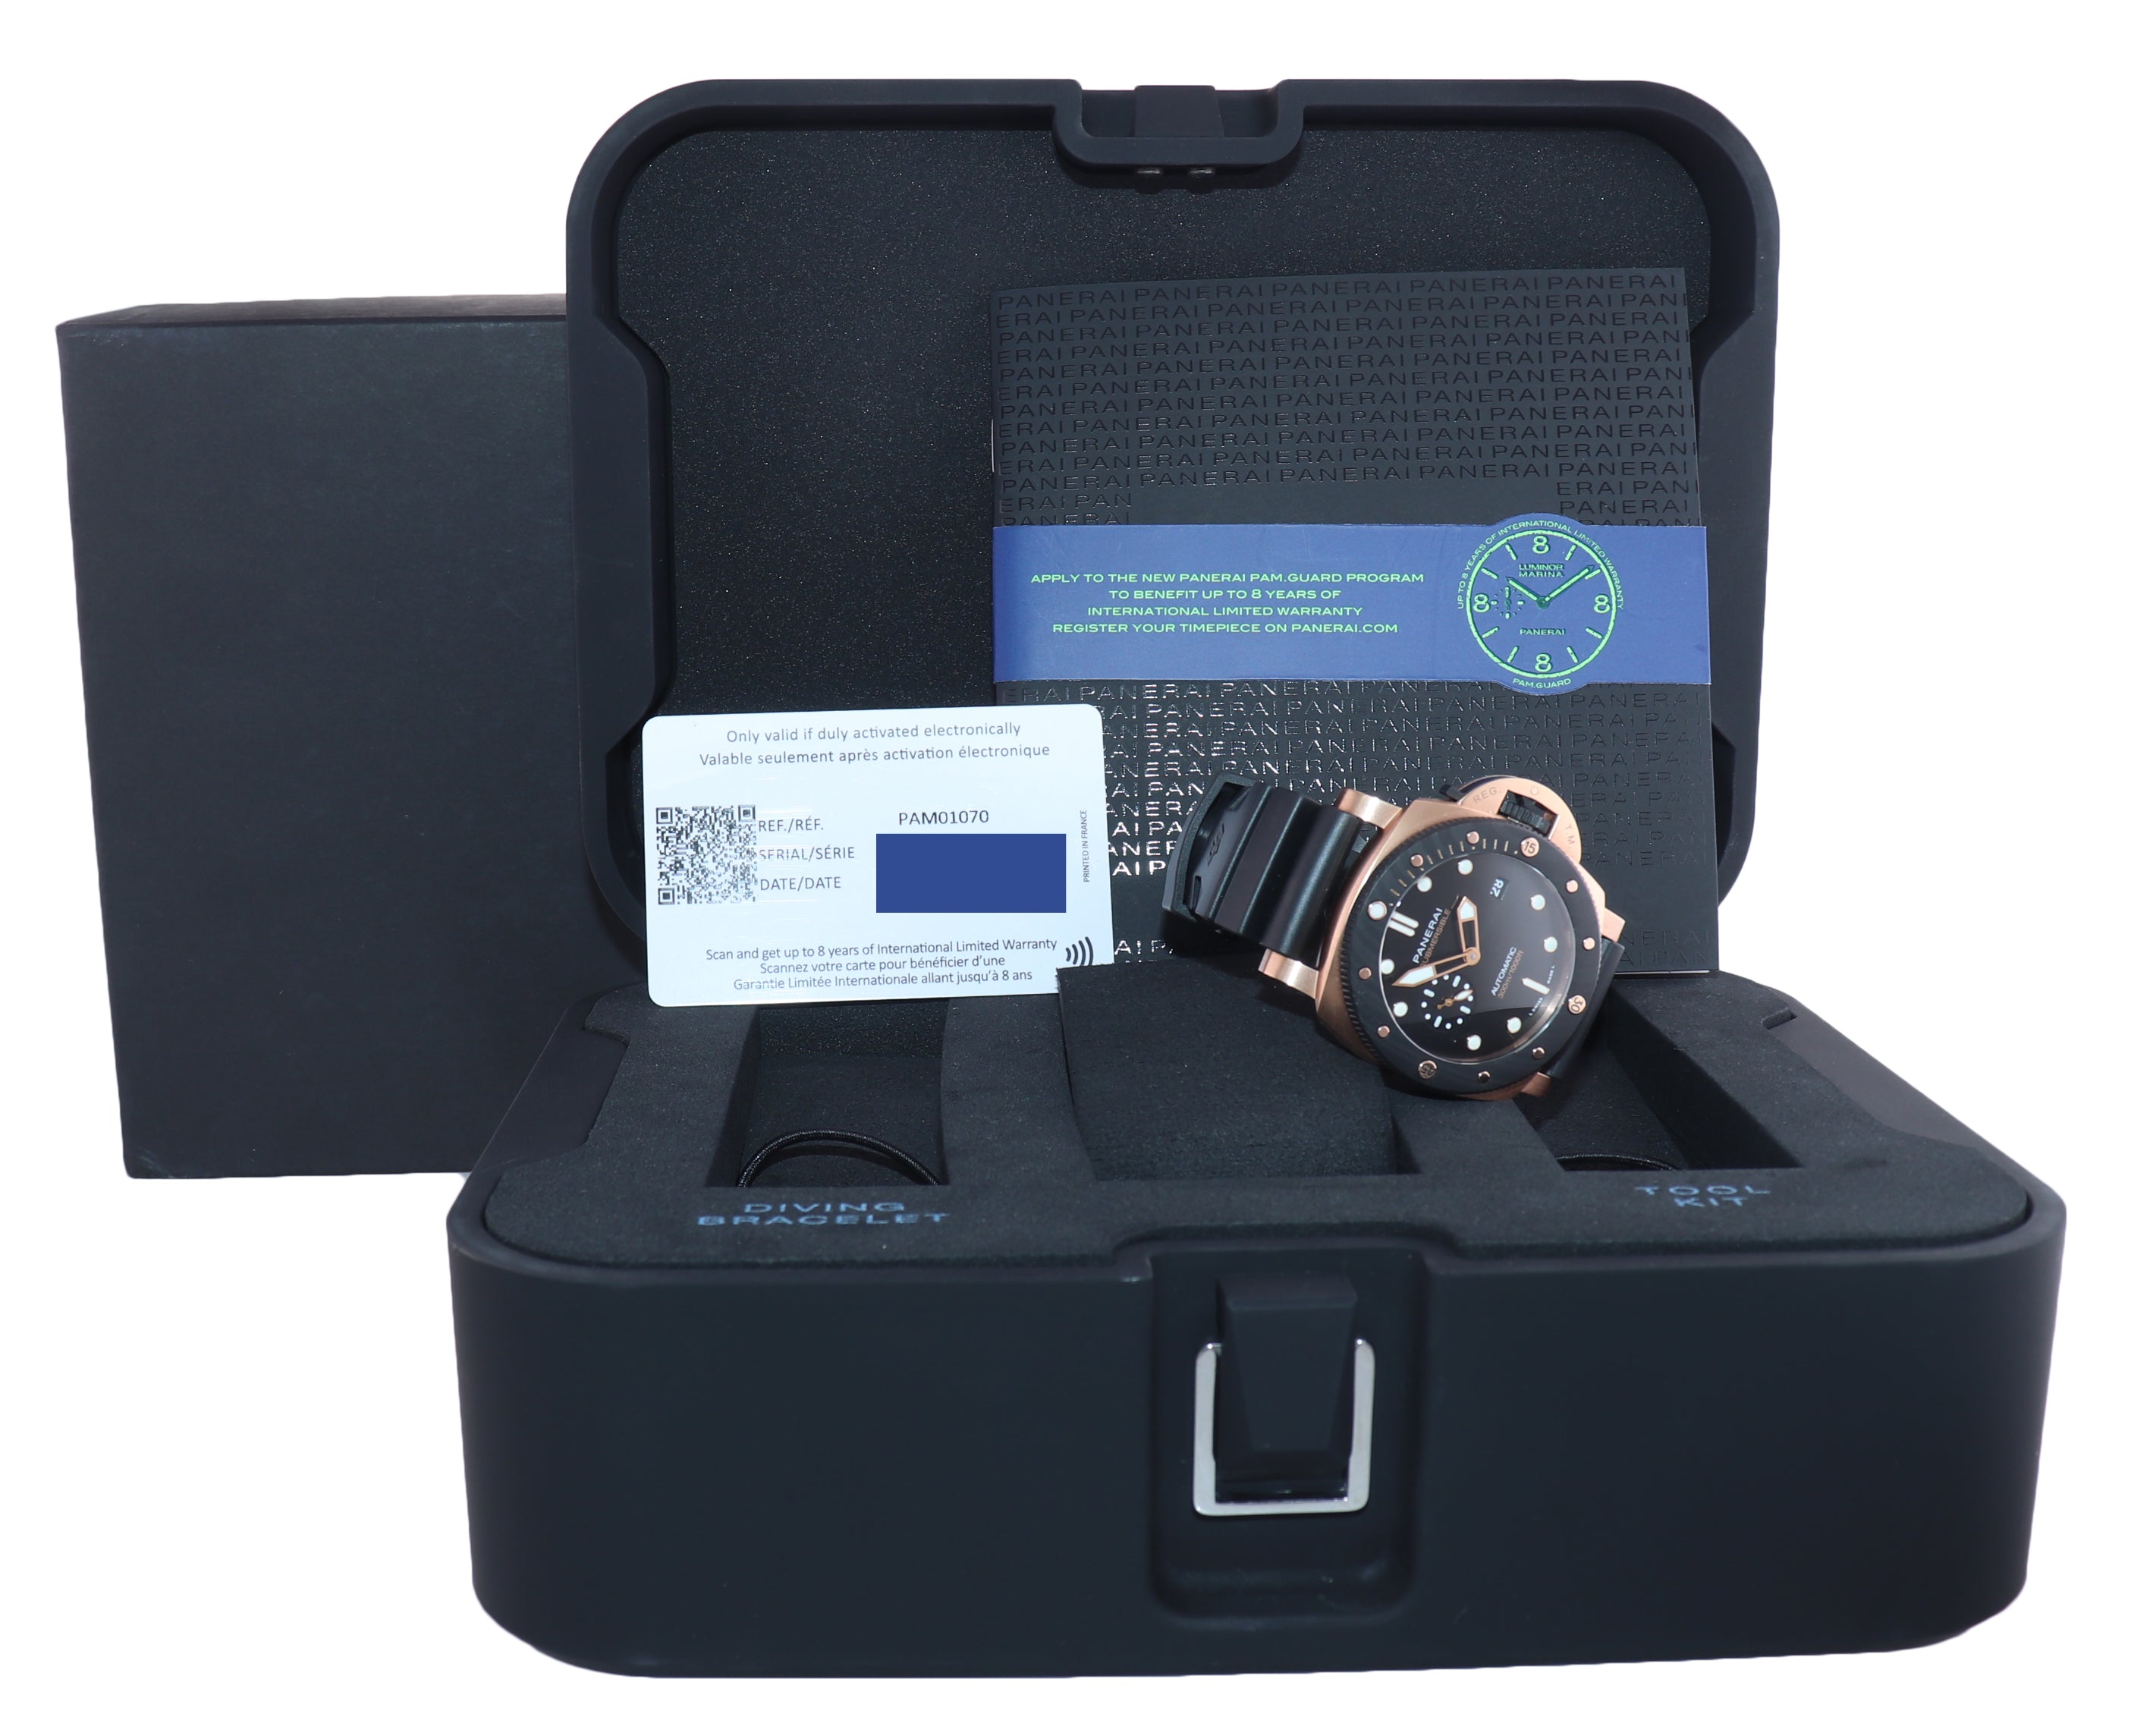 PAPERS Panerai Submersible Goldtech Oro PAM01070 Rose Gold Carbotech PAM 1070